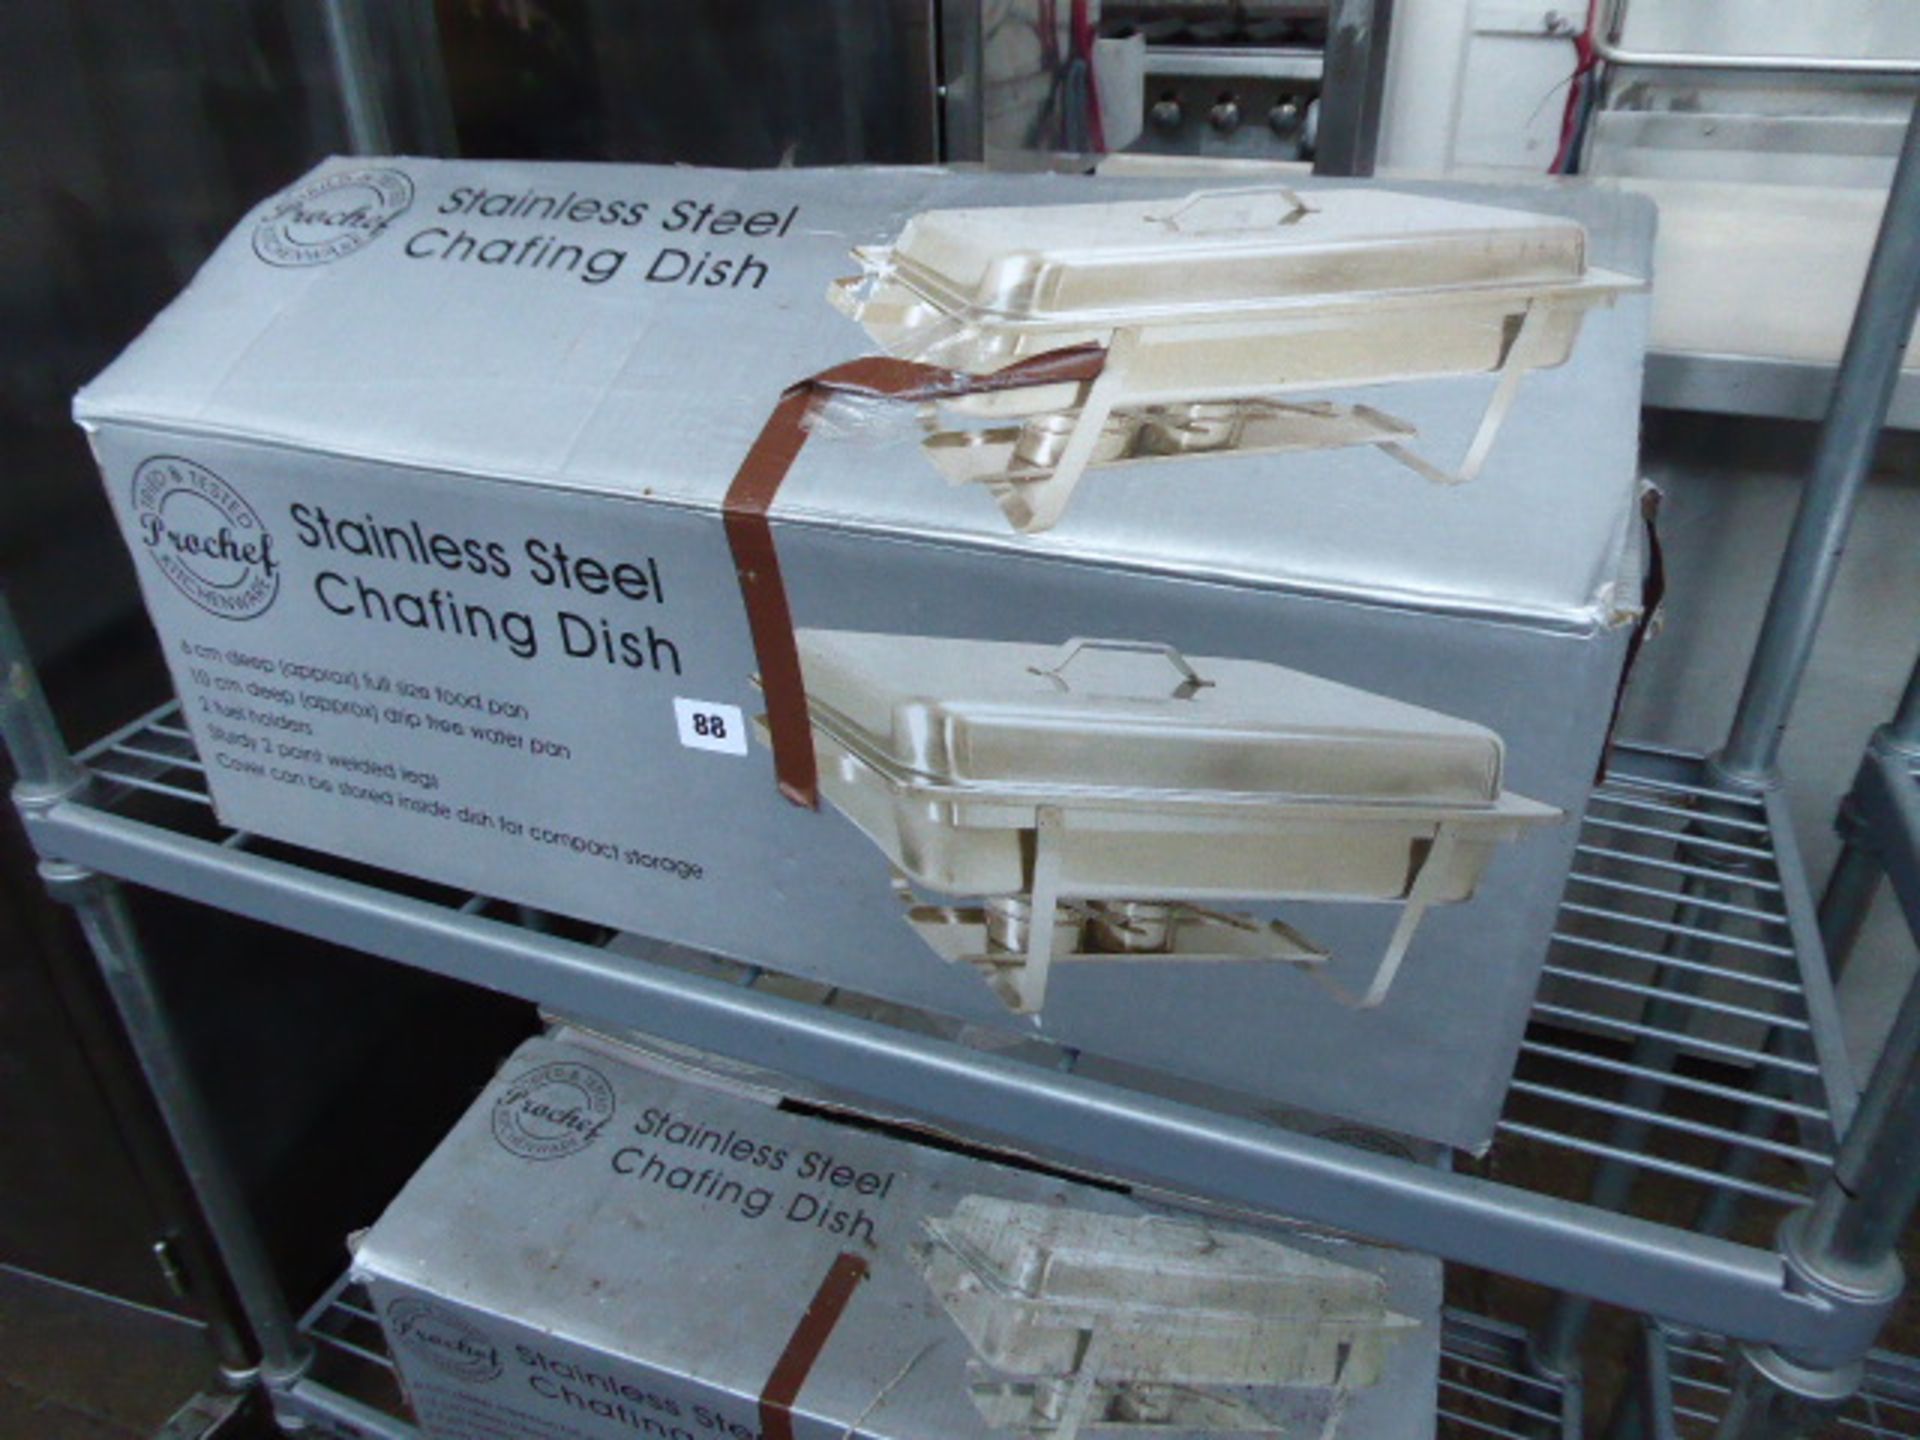 2 Boxed stainless steel chaffing dish sets